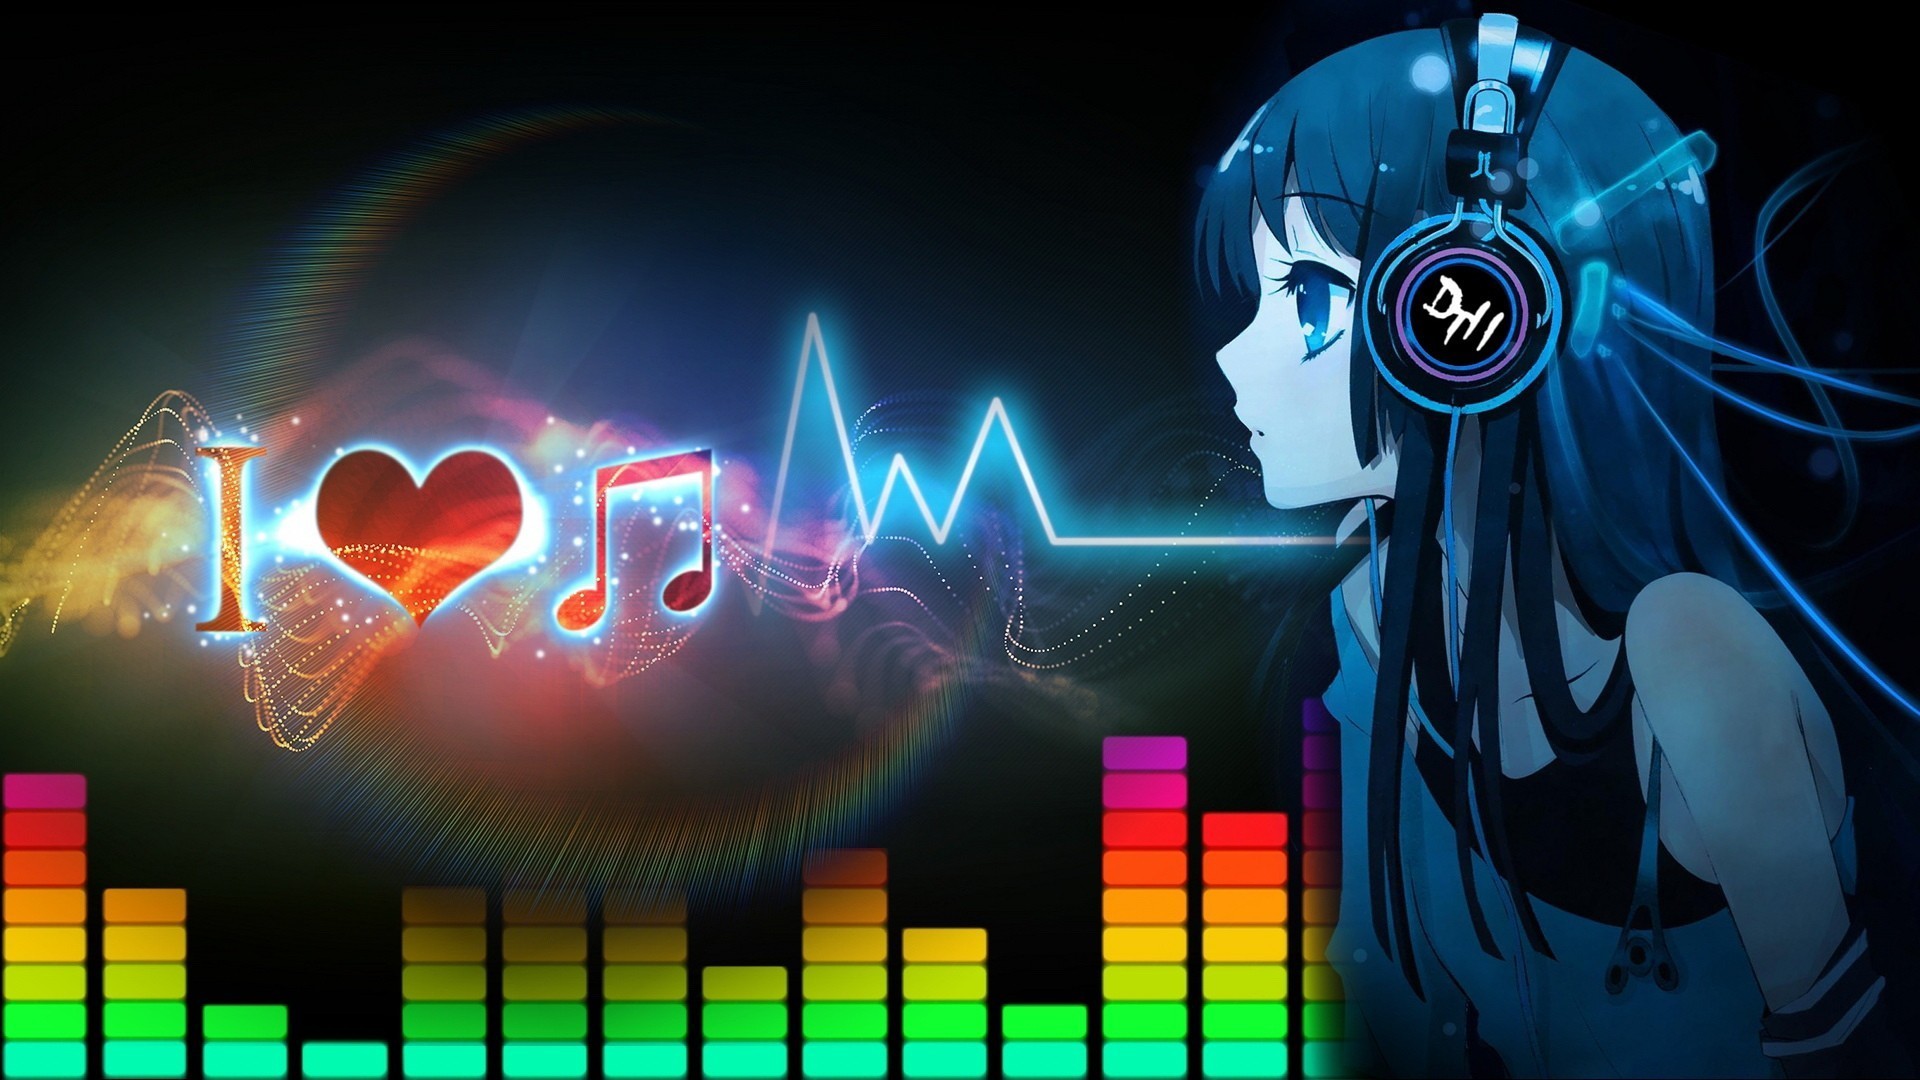 1920x1080 1920x1200 Anime Music Wallpapers hd wallpapers ›› Page 0 | HD Wallpaper